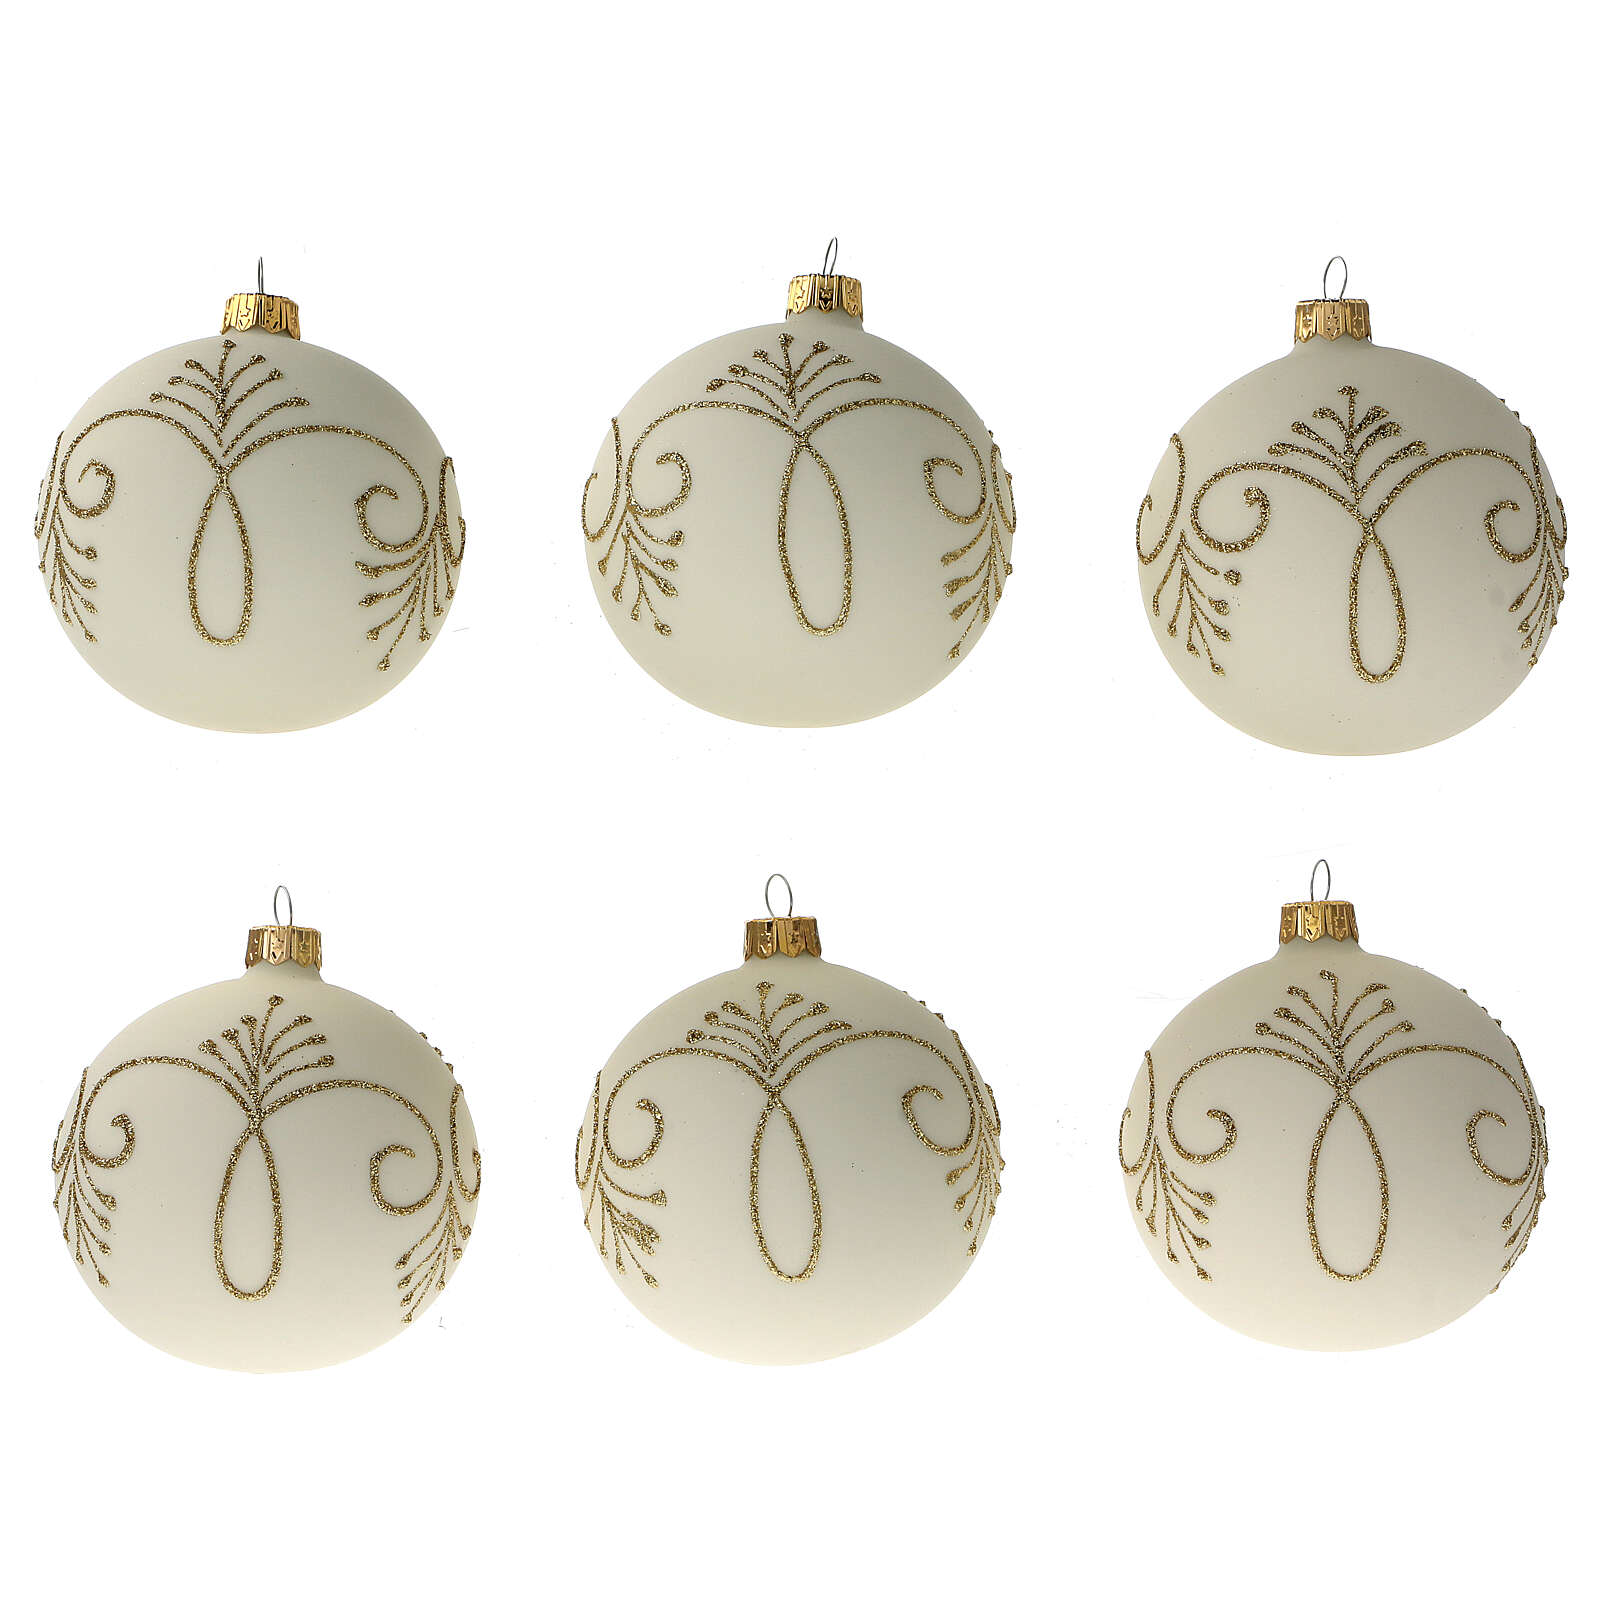 6 Hand Painted Glass Baubles Christmas Tree Decorations 80 mm/8cm,high quality!